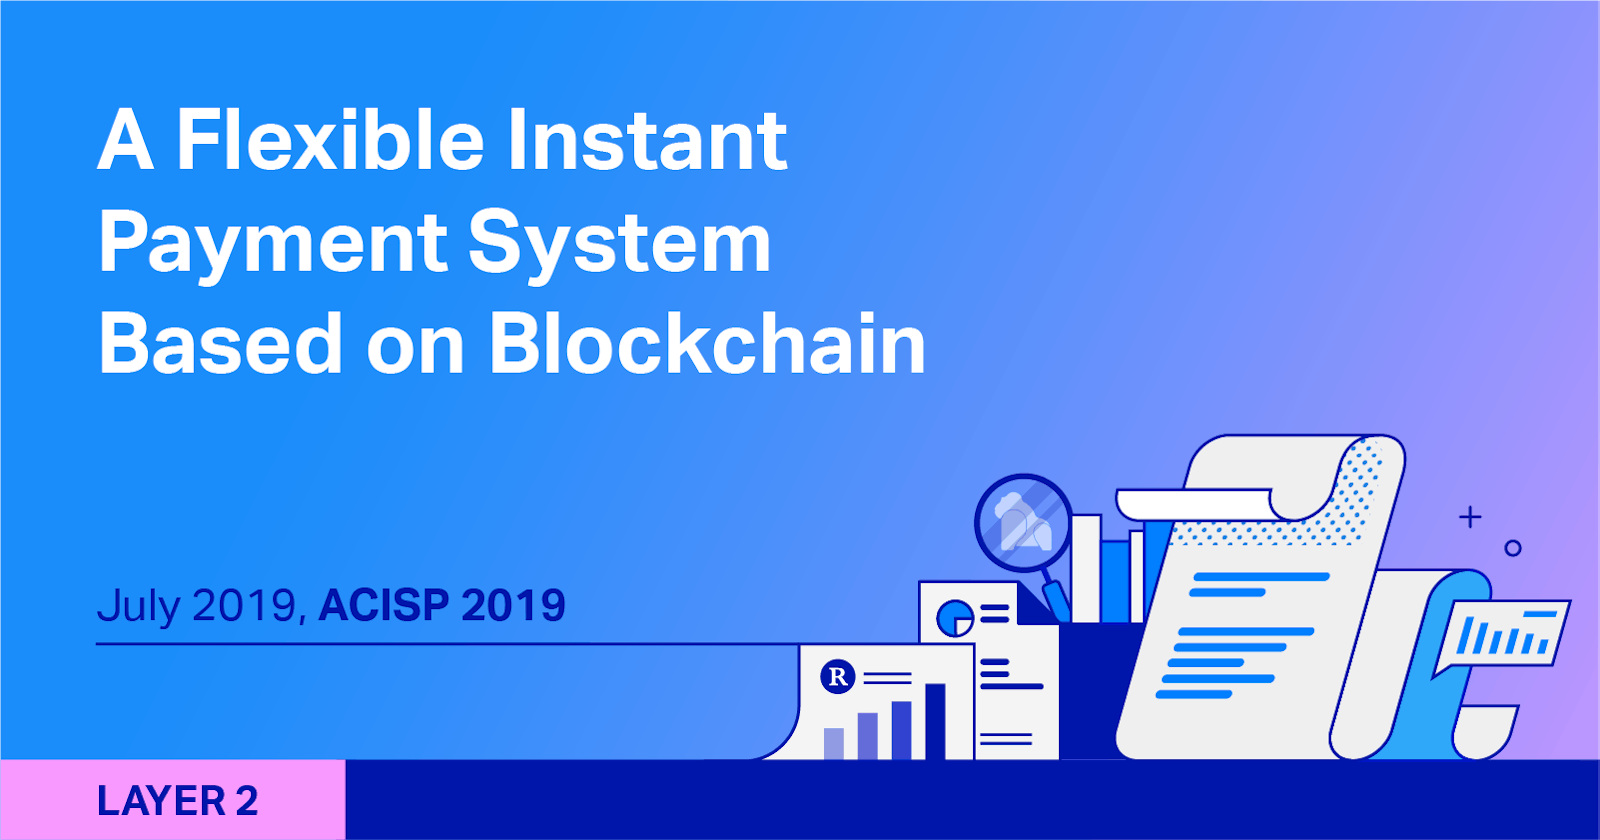 A Flexible Instant Payment System Based on Blockchain